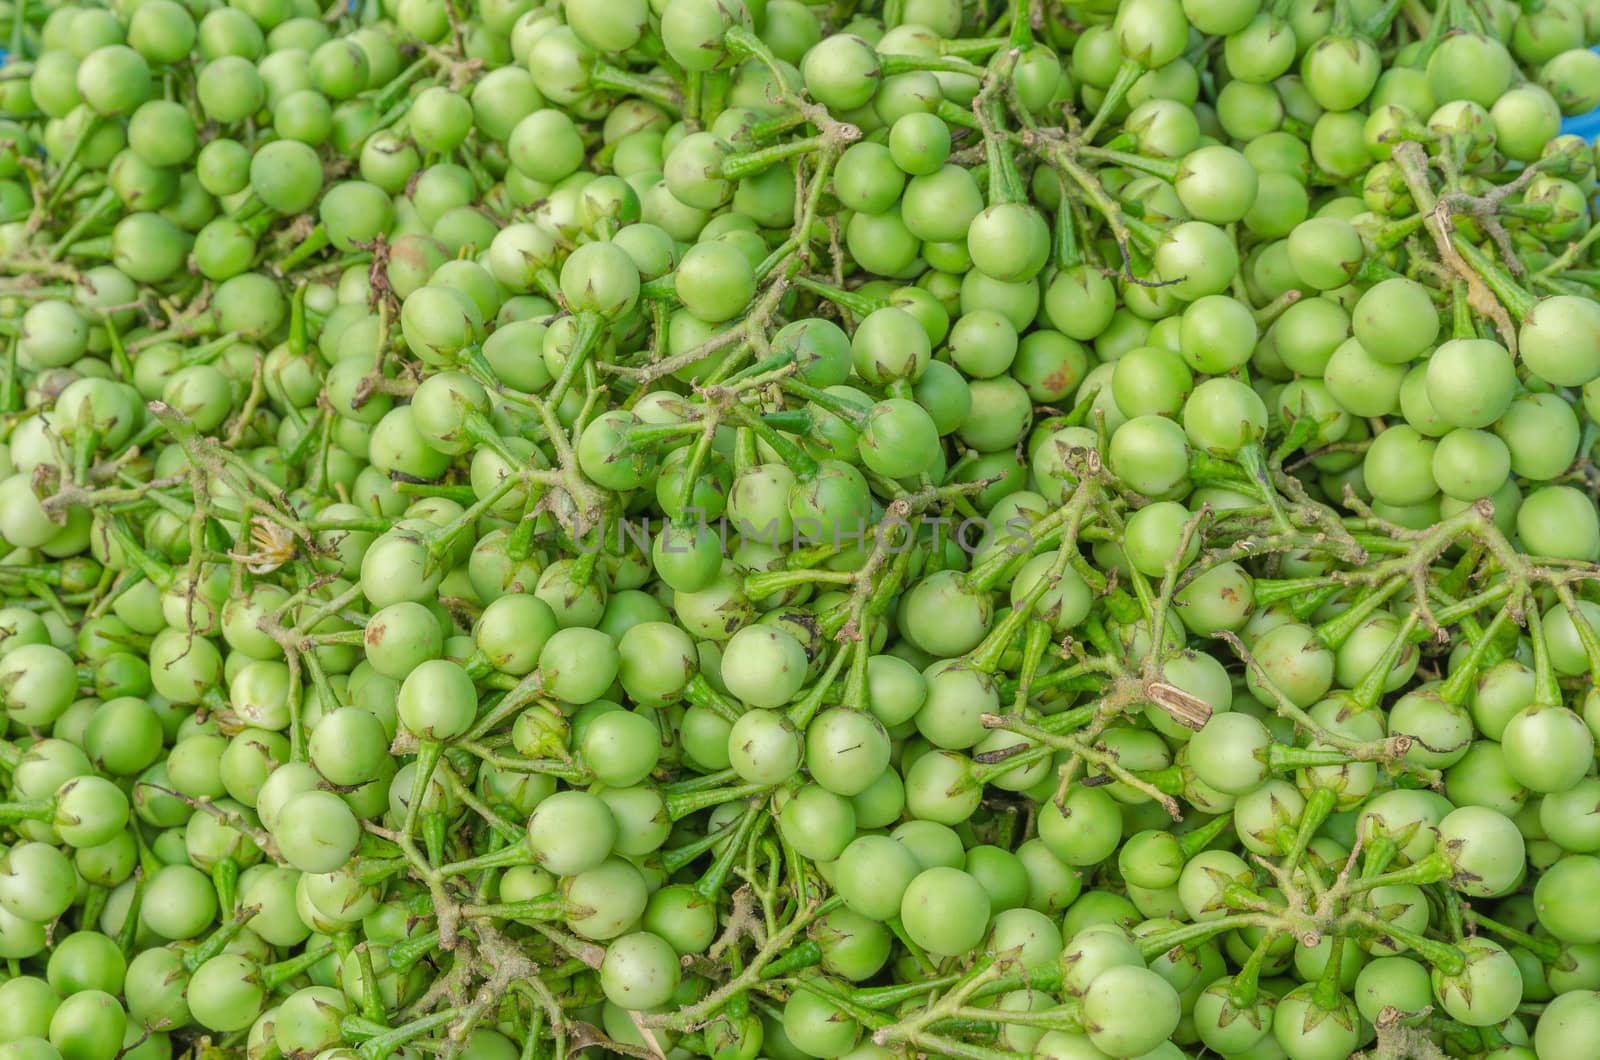 Green Turkey berry sell at the fresh food market in Thailand